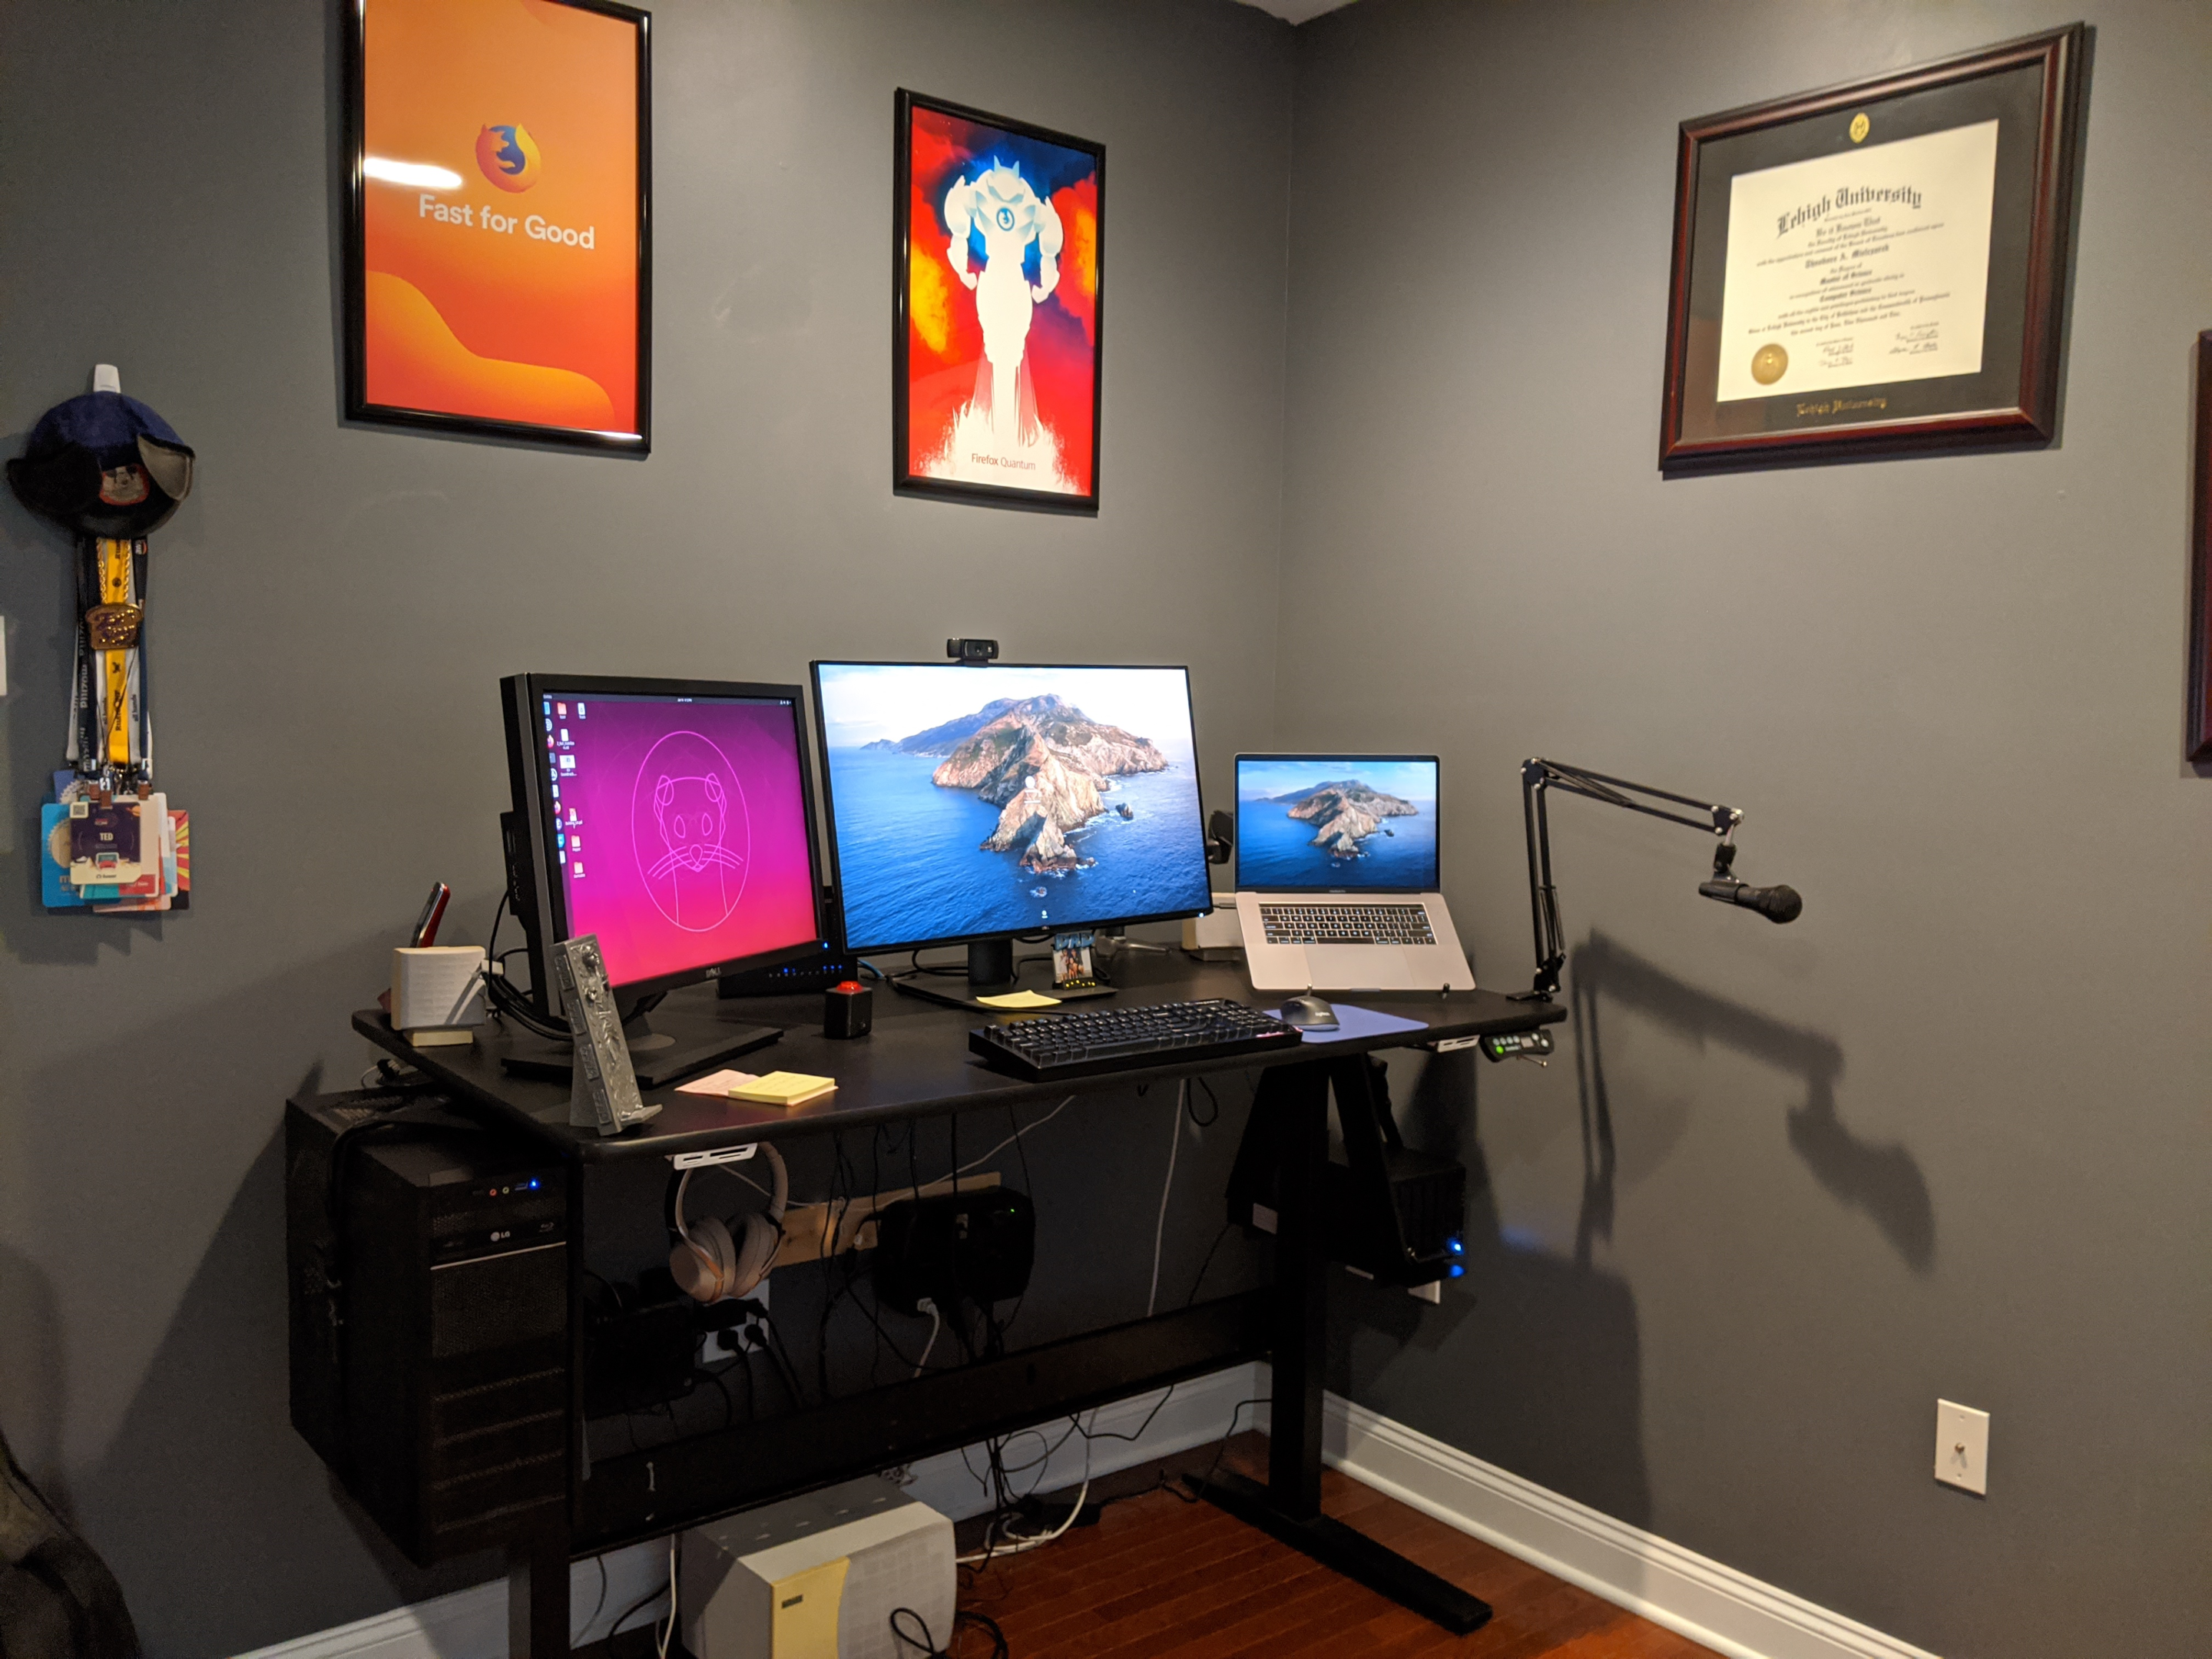 Image from Wikimedia commons by Ted Mielczarek | Home office set-up 